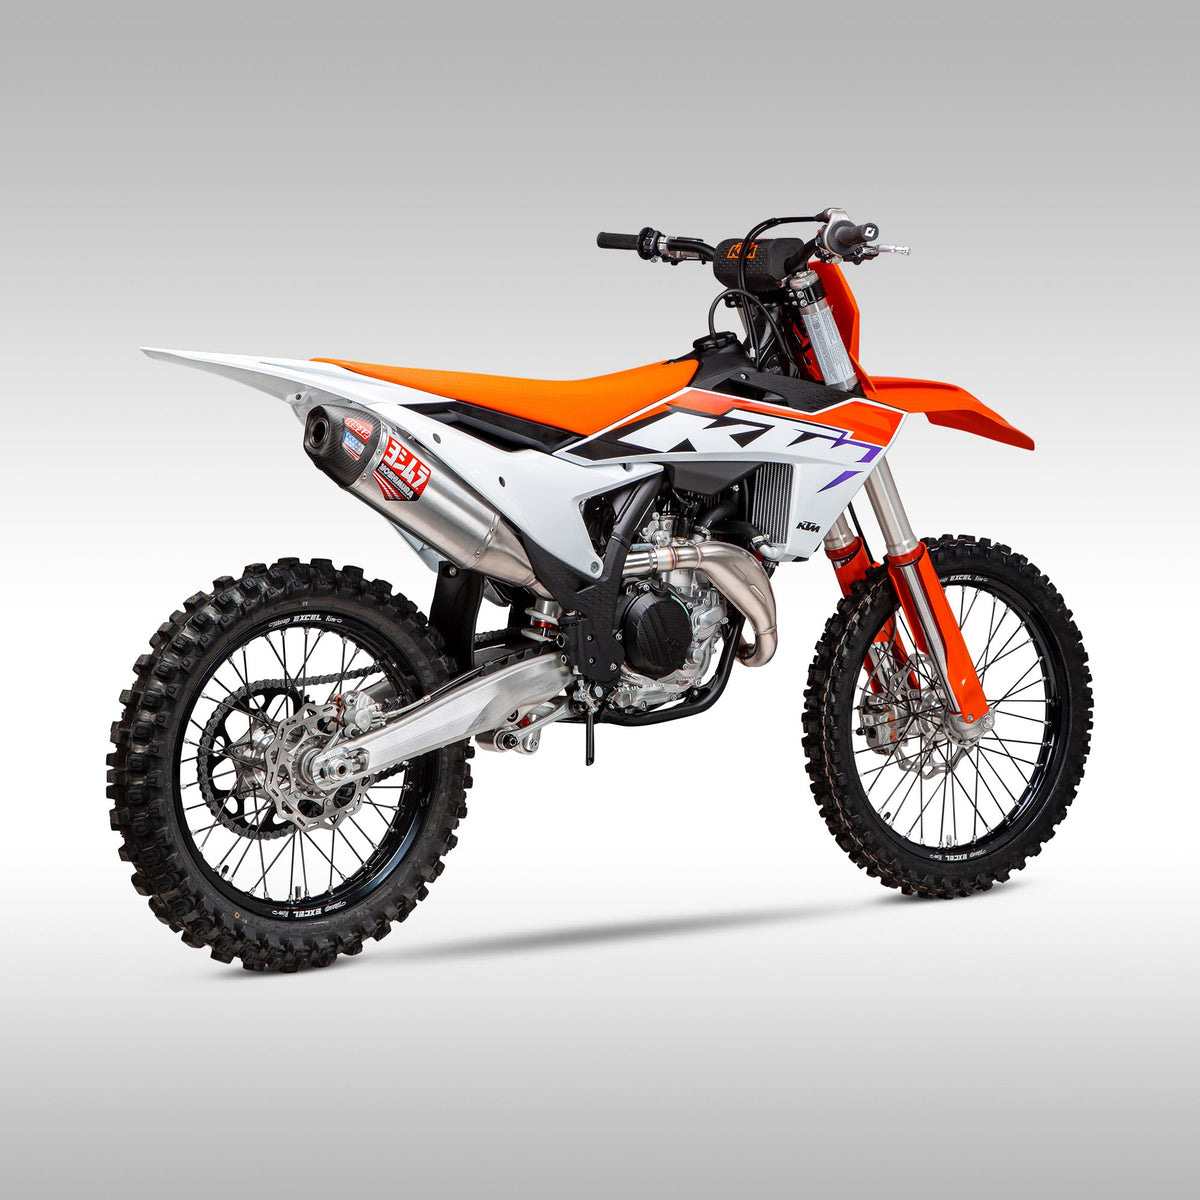 The Yoshimura RS-12 Slip-On Signature Series RS-12 slip-on provides additional power and it increases the torque for you KTM XC-F, SX-F or Husqvarna FX, FC. Includes a USFS approved spark arrestor in every slip-on, giving you peace of mind when you&#39;re headed out to the woods. With the SA-19-K spark arrestor, your bike will be noticeably quieter, and when you&#39;re out in the backcountry, everyone can appreciate a lower lower noise signature.